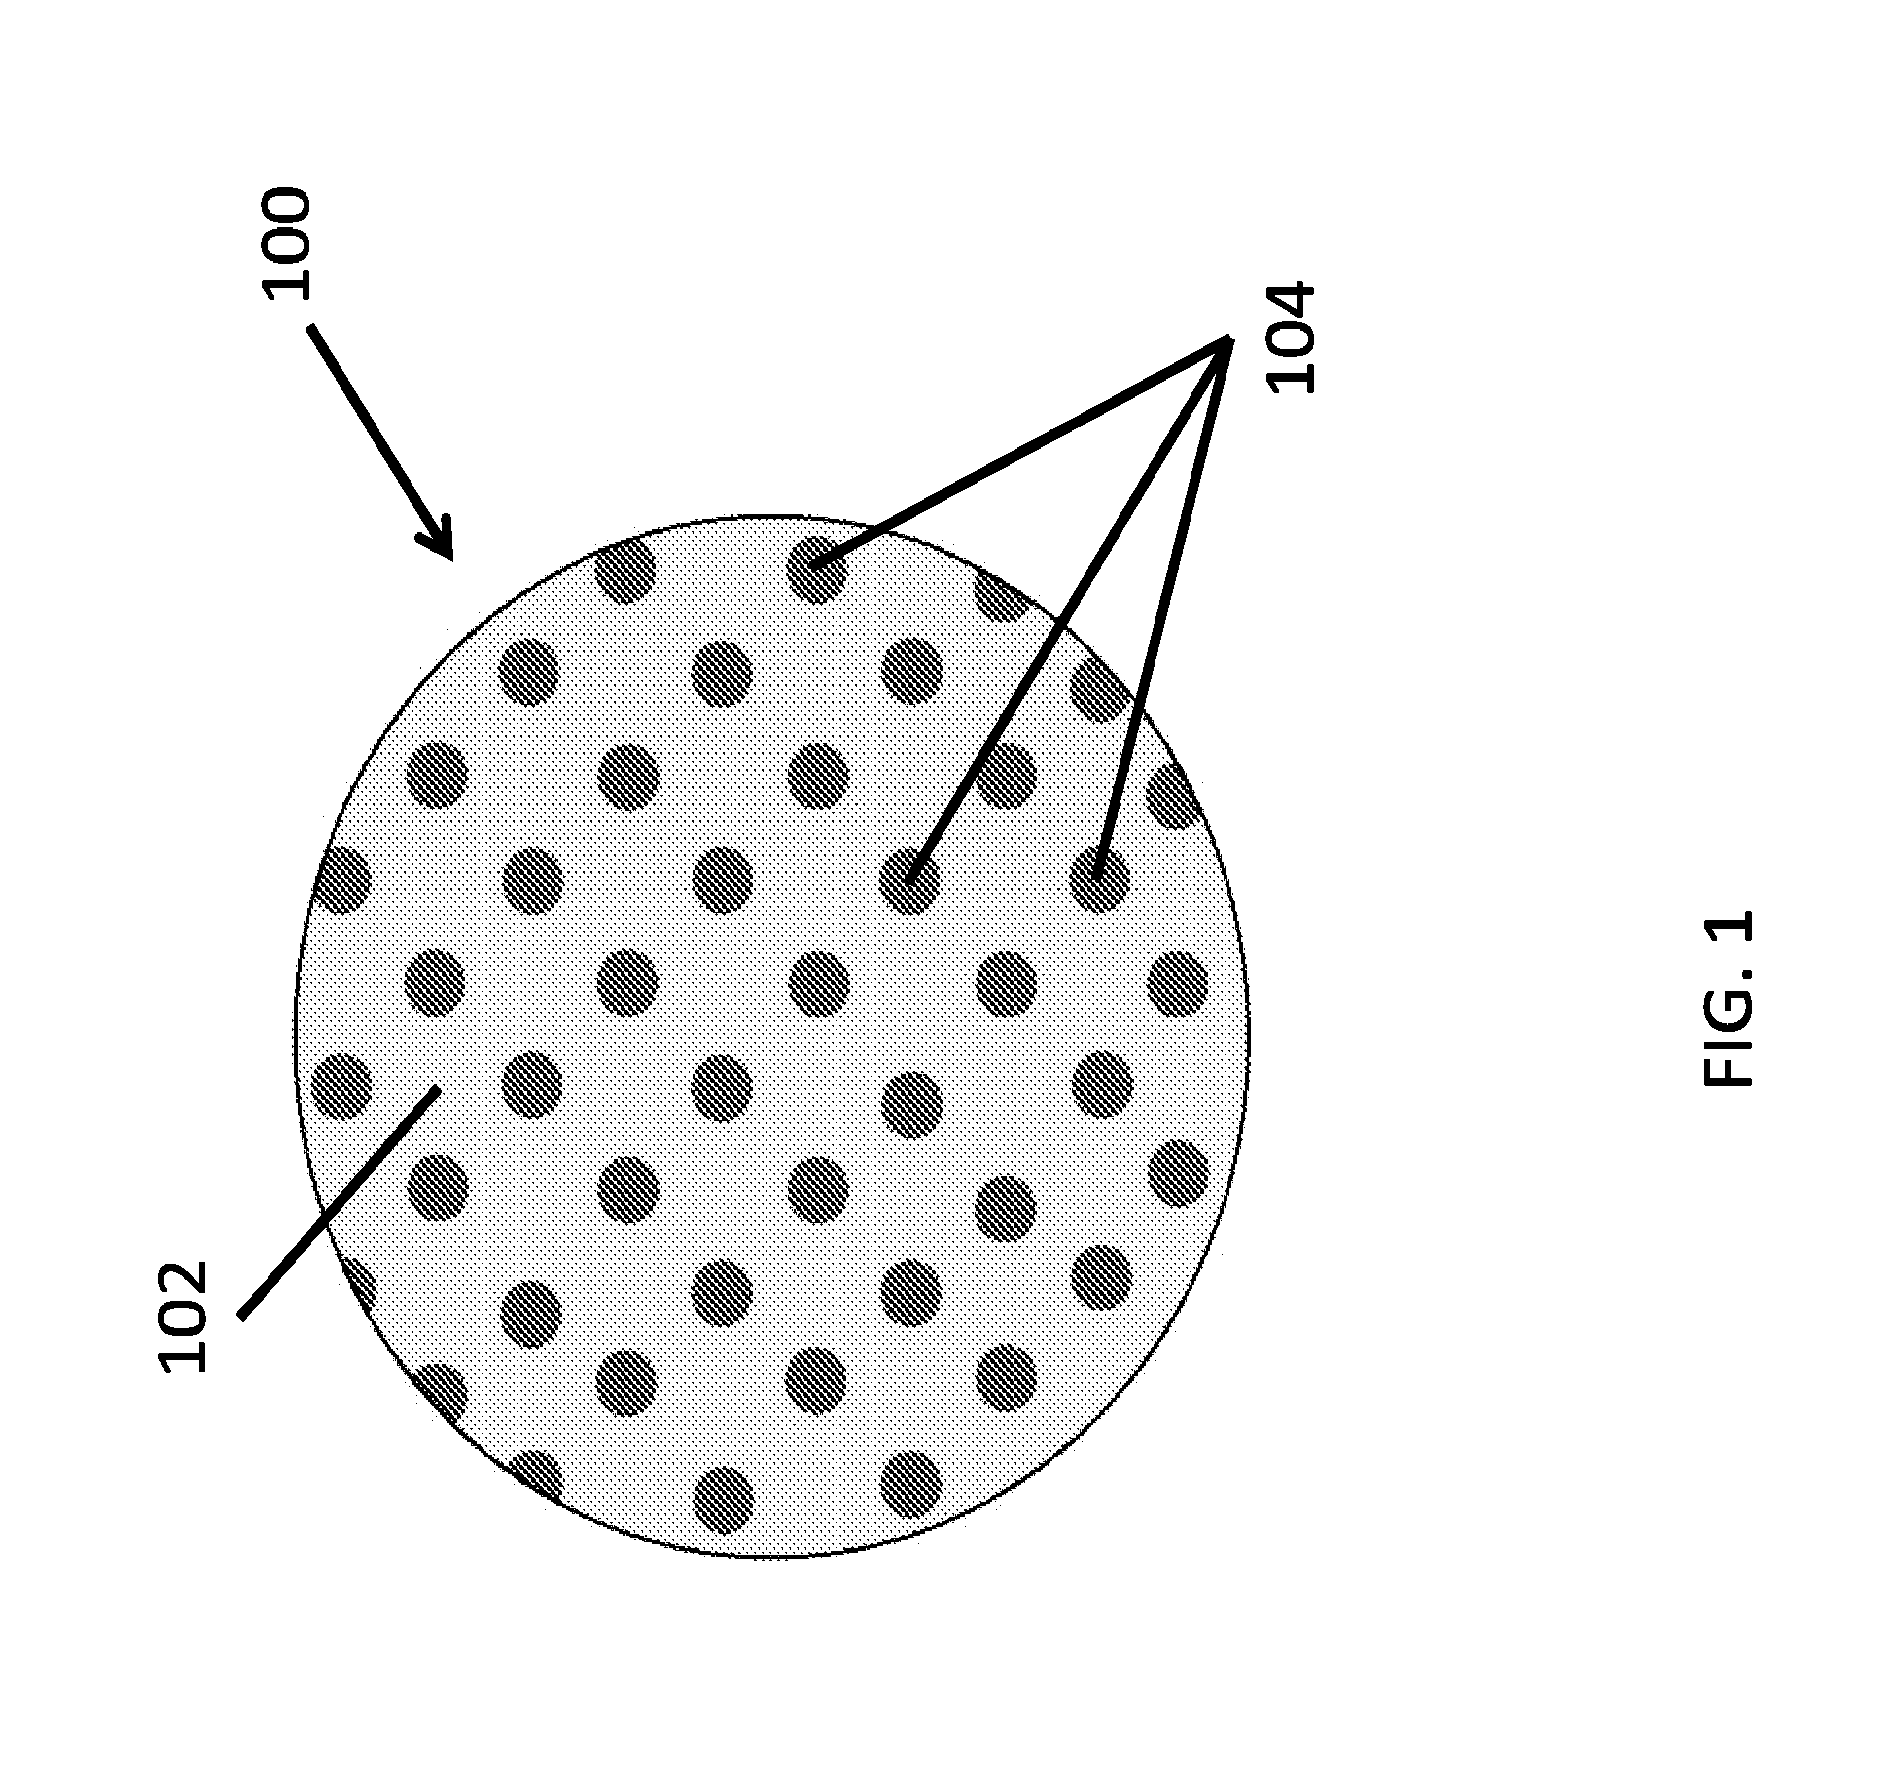 Therapeutics dispensing device and methods of making same